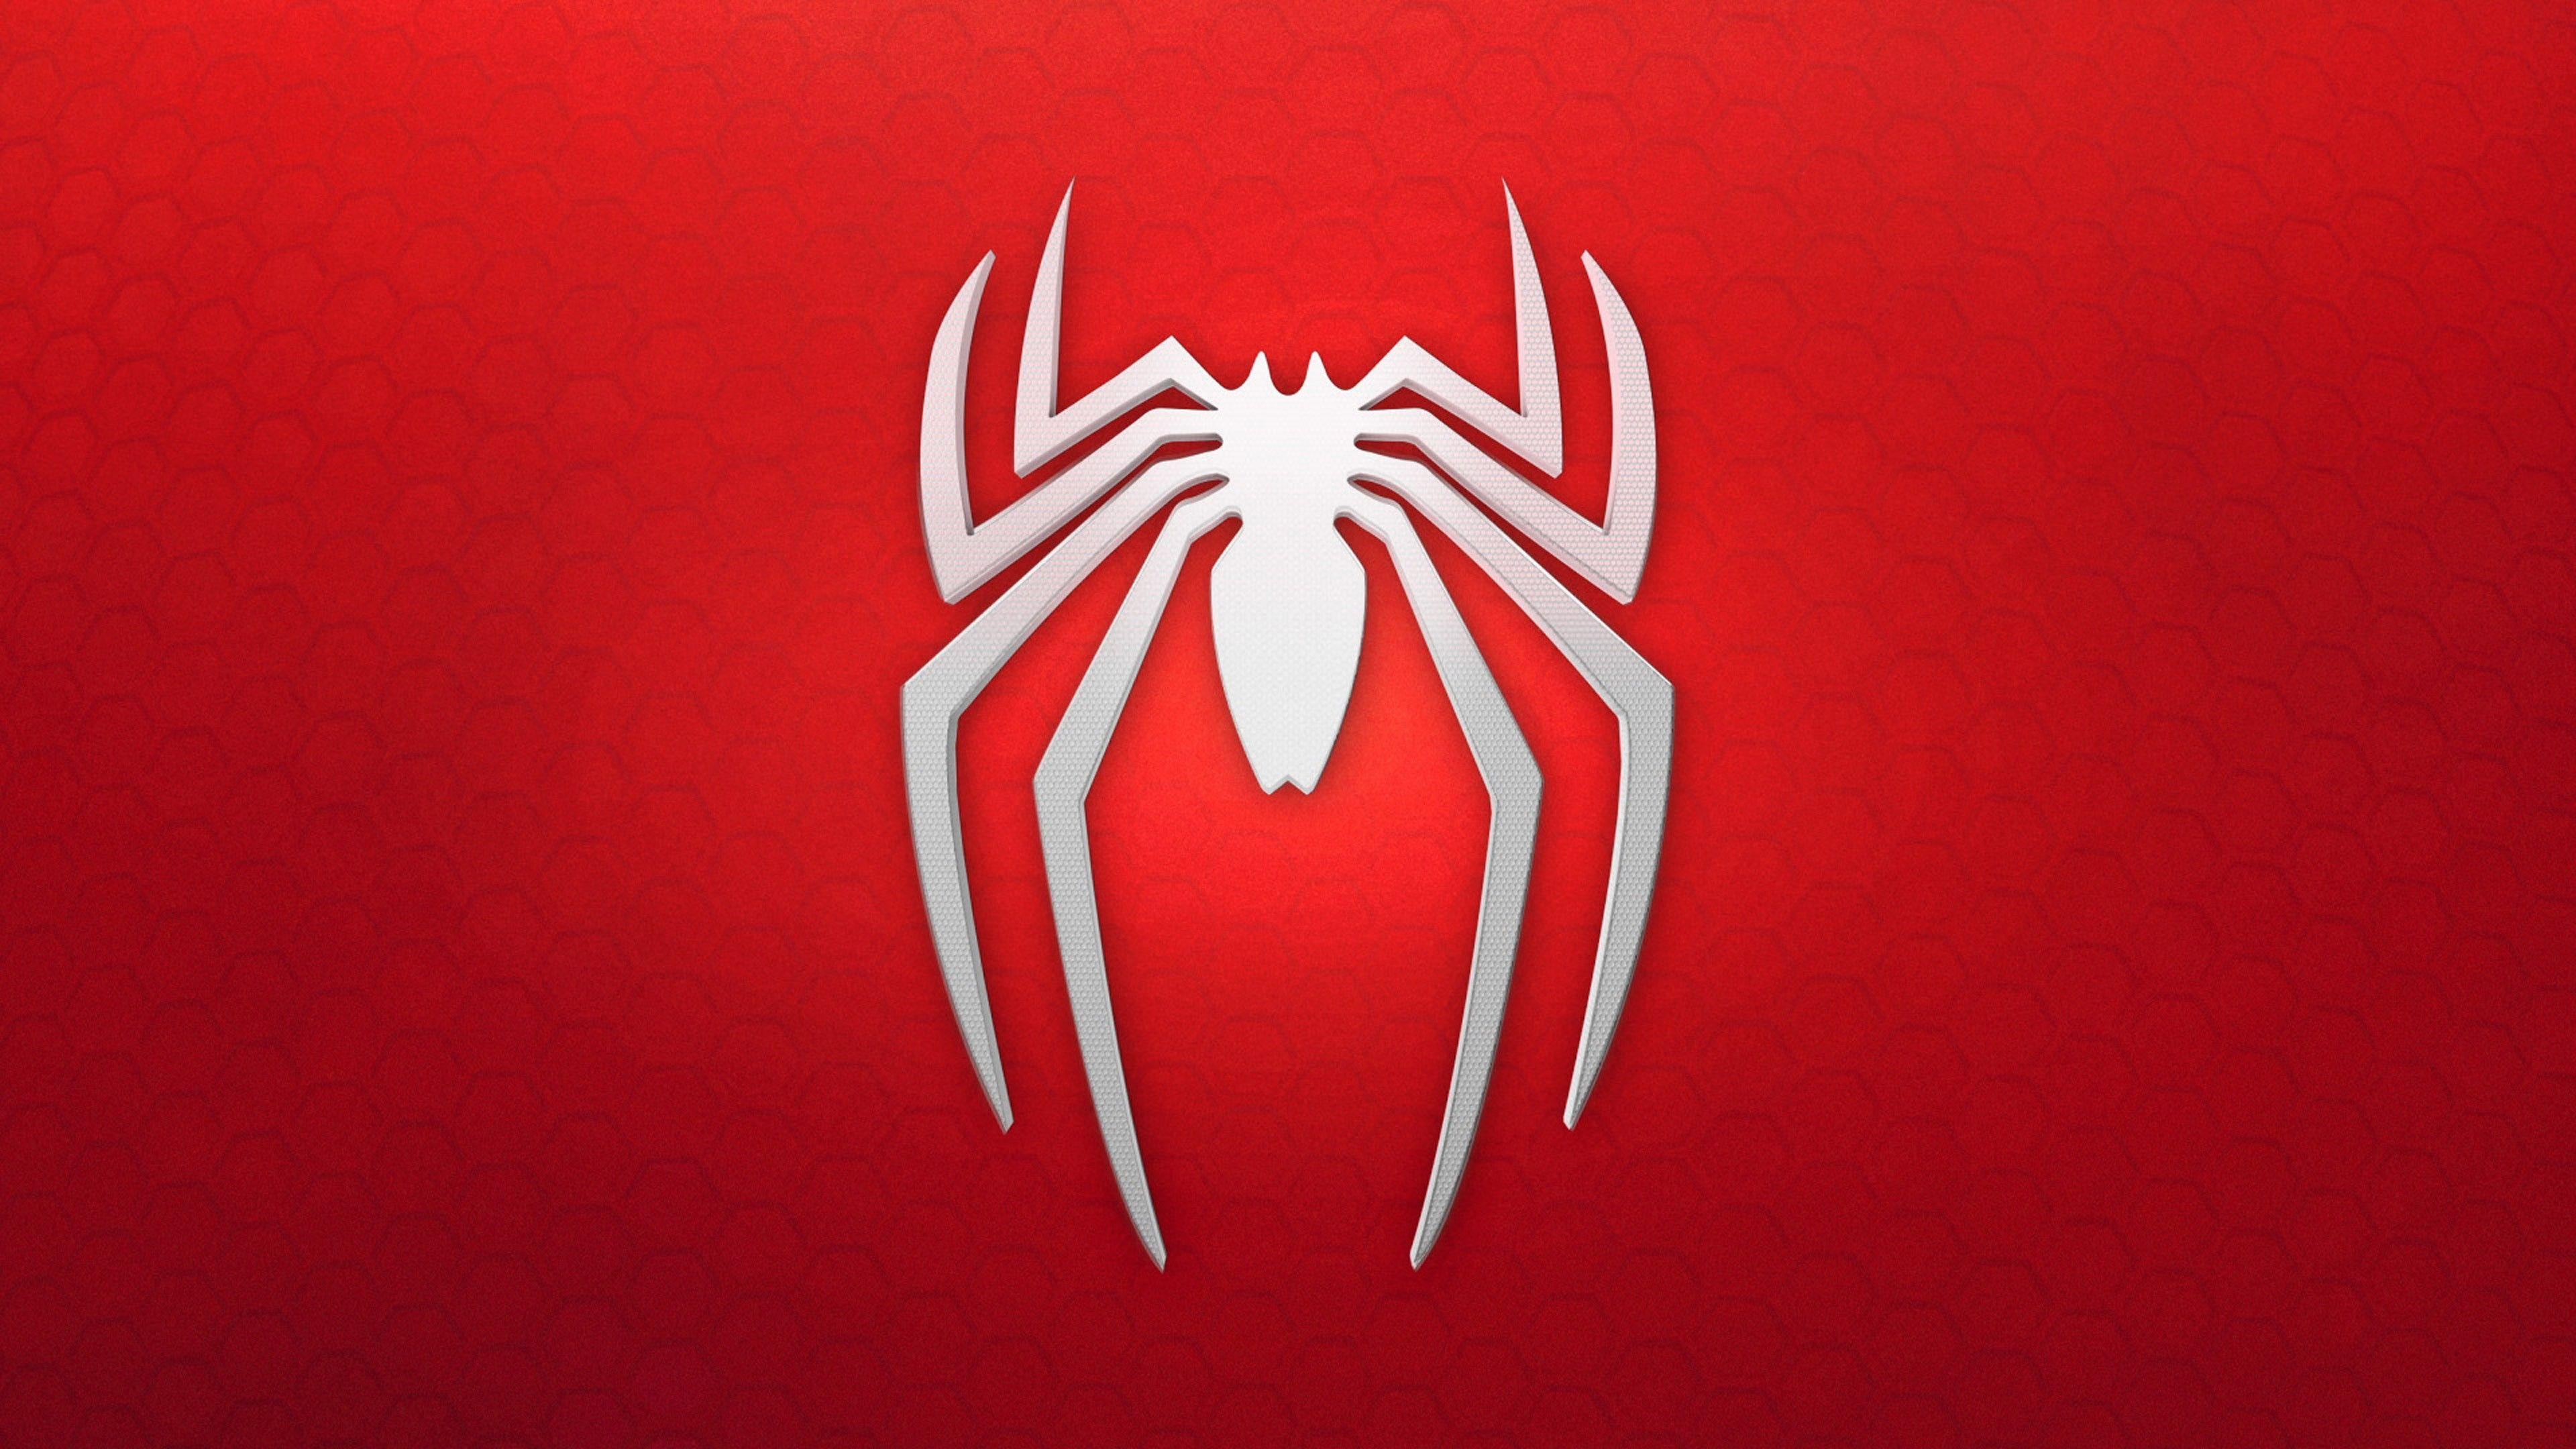 White with a Red Background Logo - Wallpaper spiderman, logo, background, red, white, Games #11596